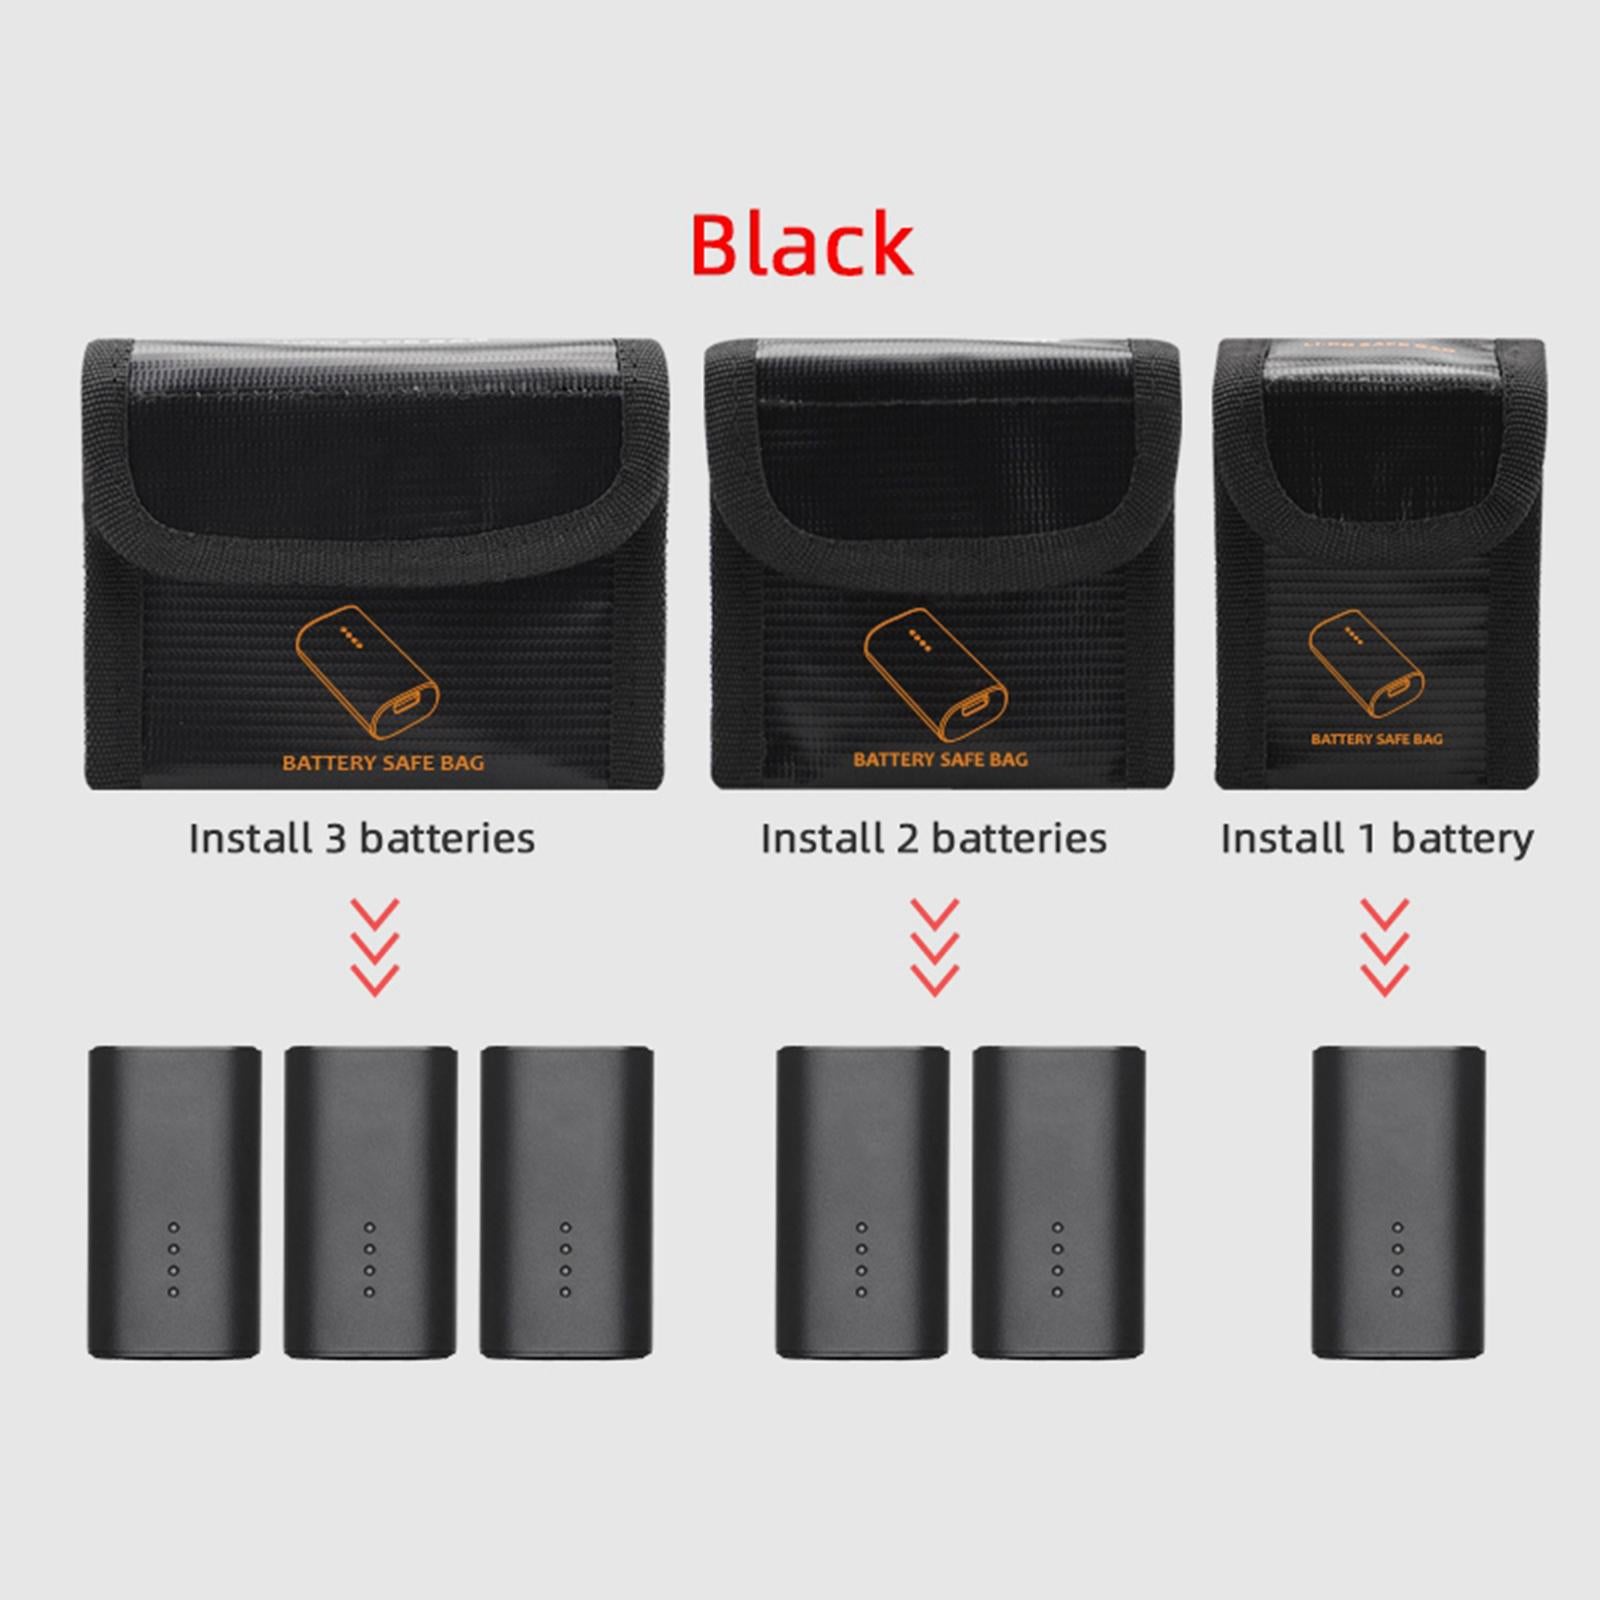 (9x11.3x5cm Waterproof Explosion-Proof Battery Safety Bag for DJI Racing Black M